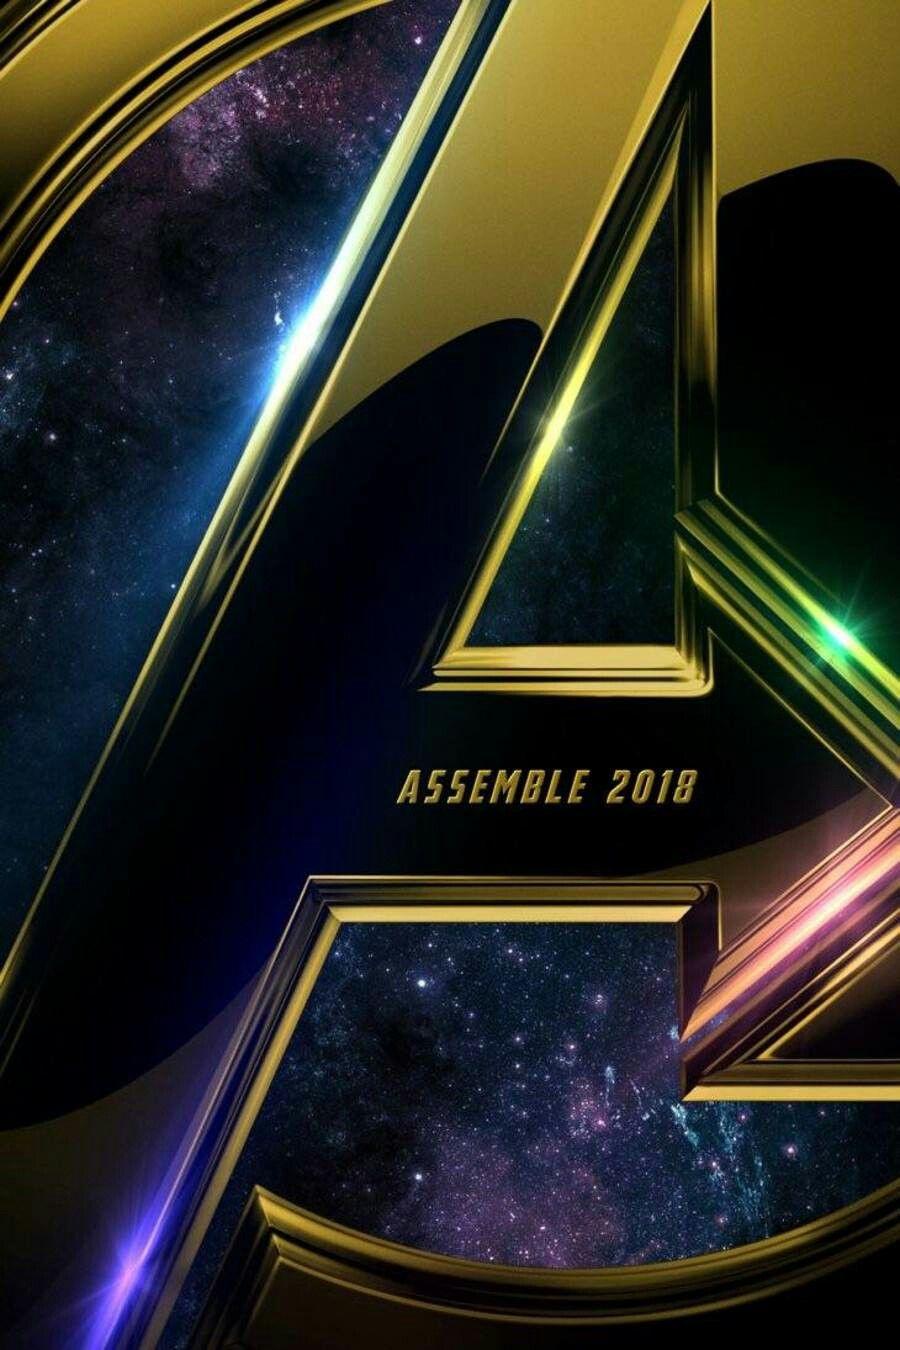 Avengers Infinity War Logo - Newest poster of avengers infinity war featuring the avengers logo ...